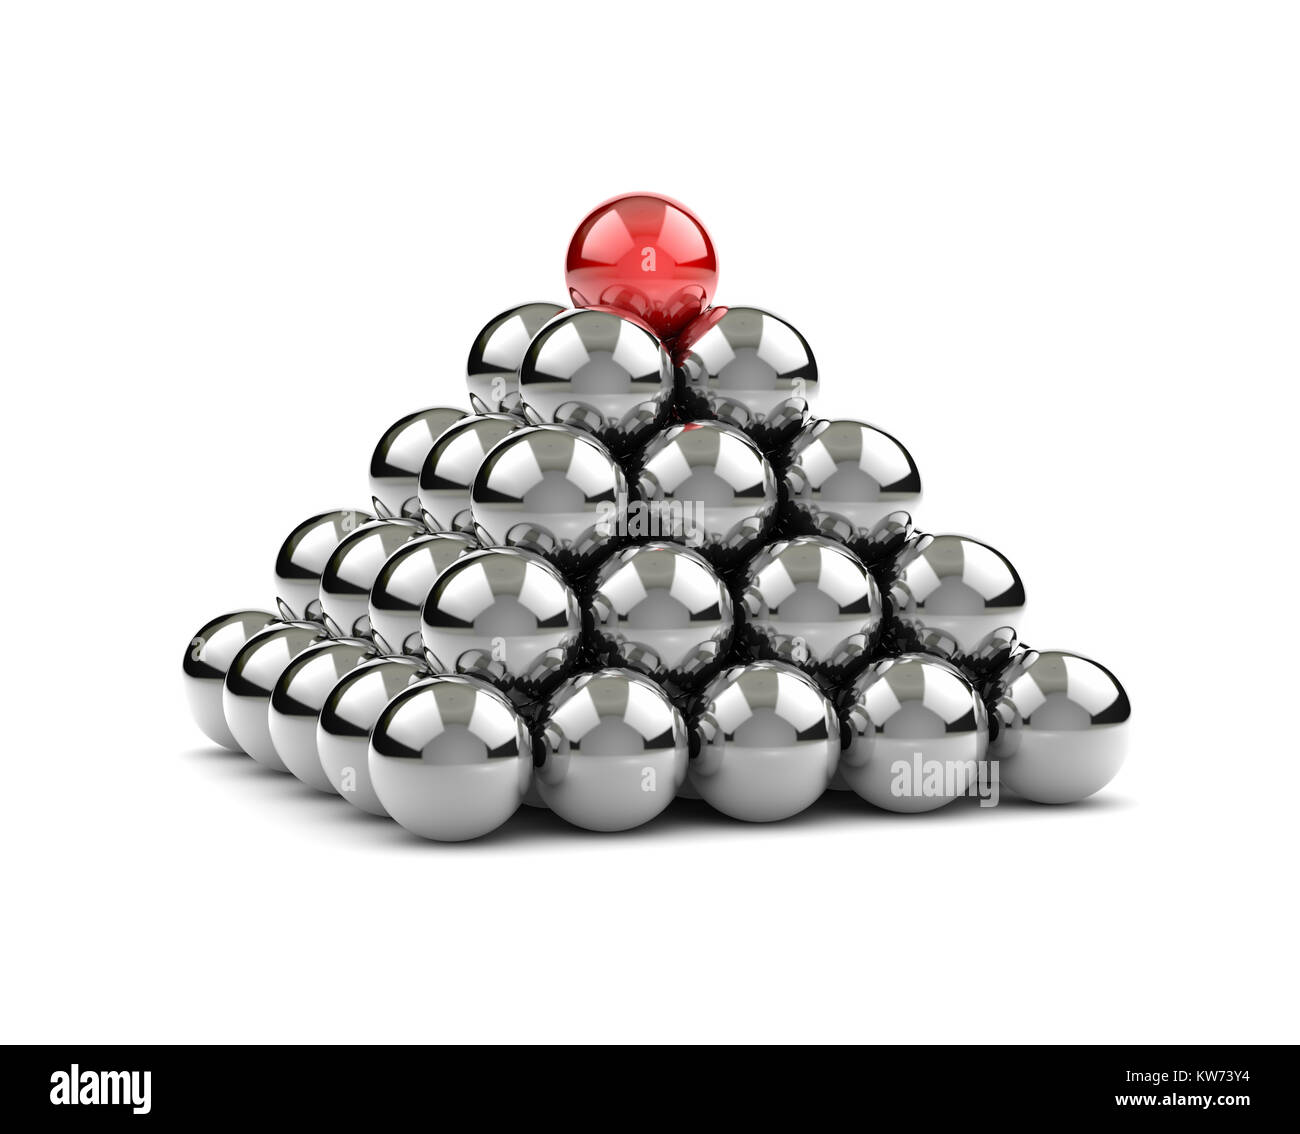 Pyramid of Metallic Balls with One Red on Top on White Background 3D Illustration Stock Photo